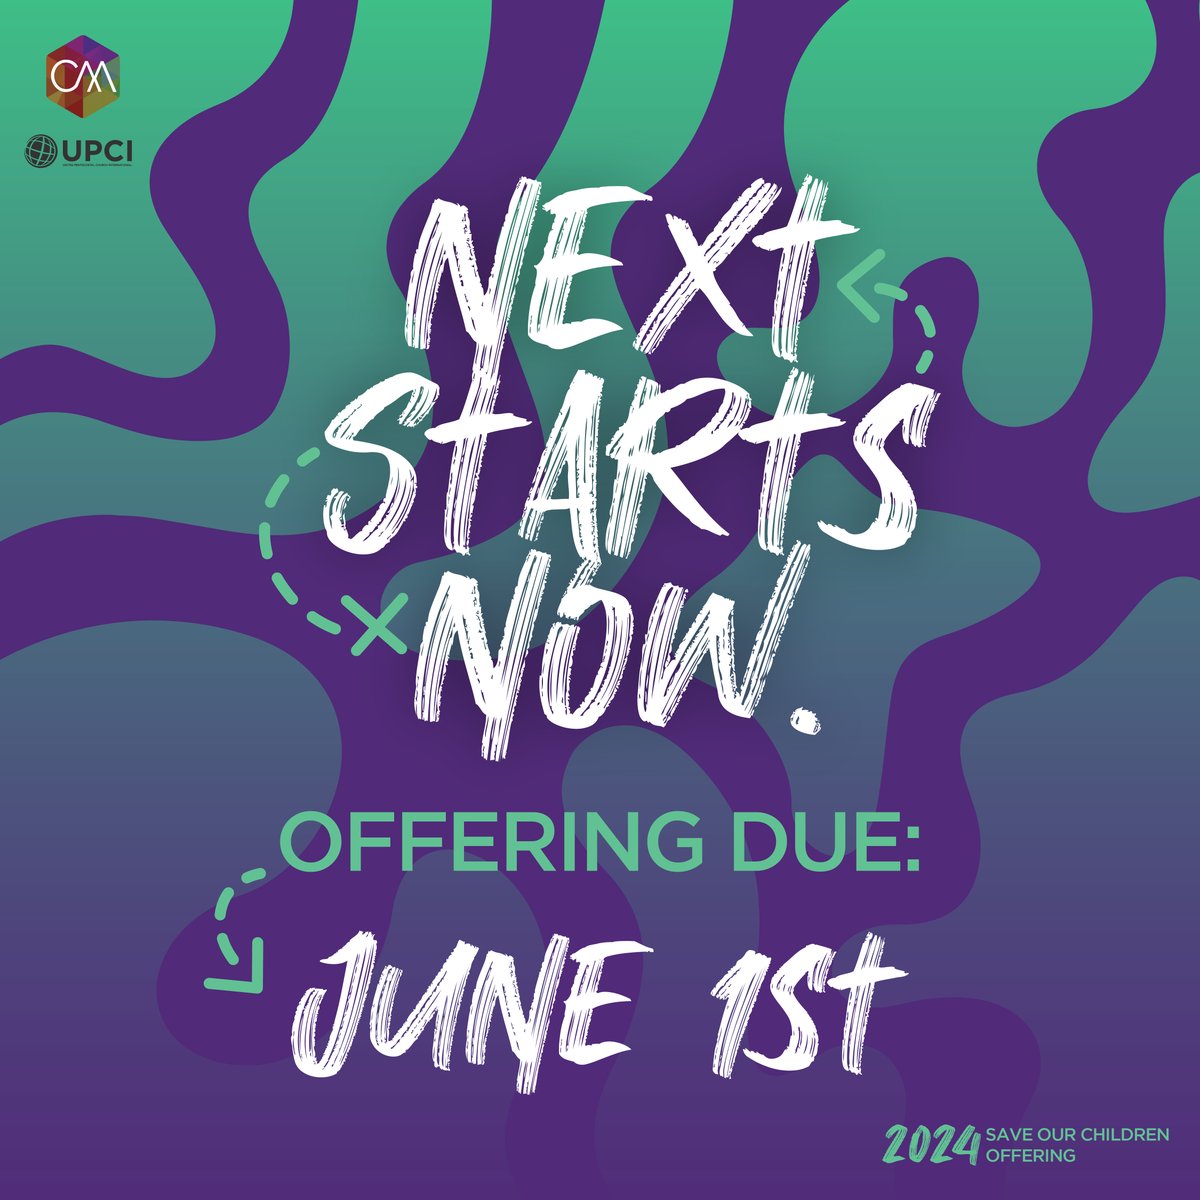 There is still time to give to Save Our Children! Next Starts Now Offering Due: June 1st Contact your District Children's Ministries Director for more information. #nextstartsNOW #upcichildrensministries #kidmin